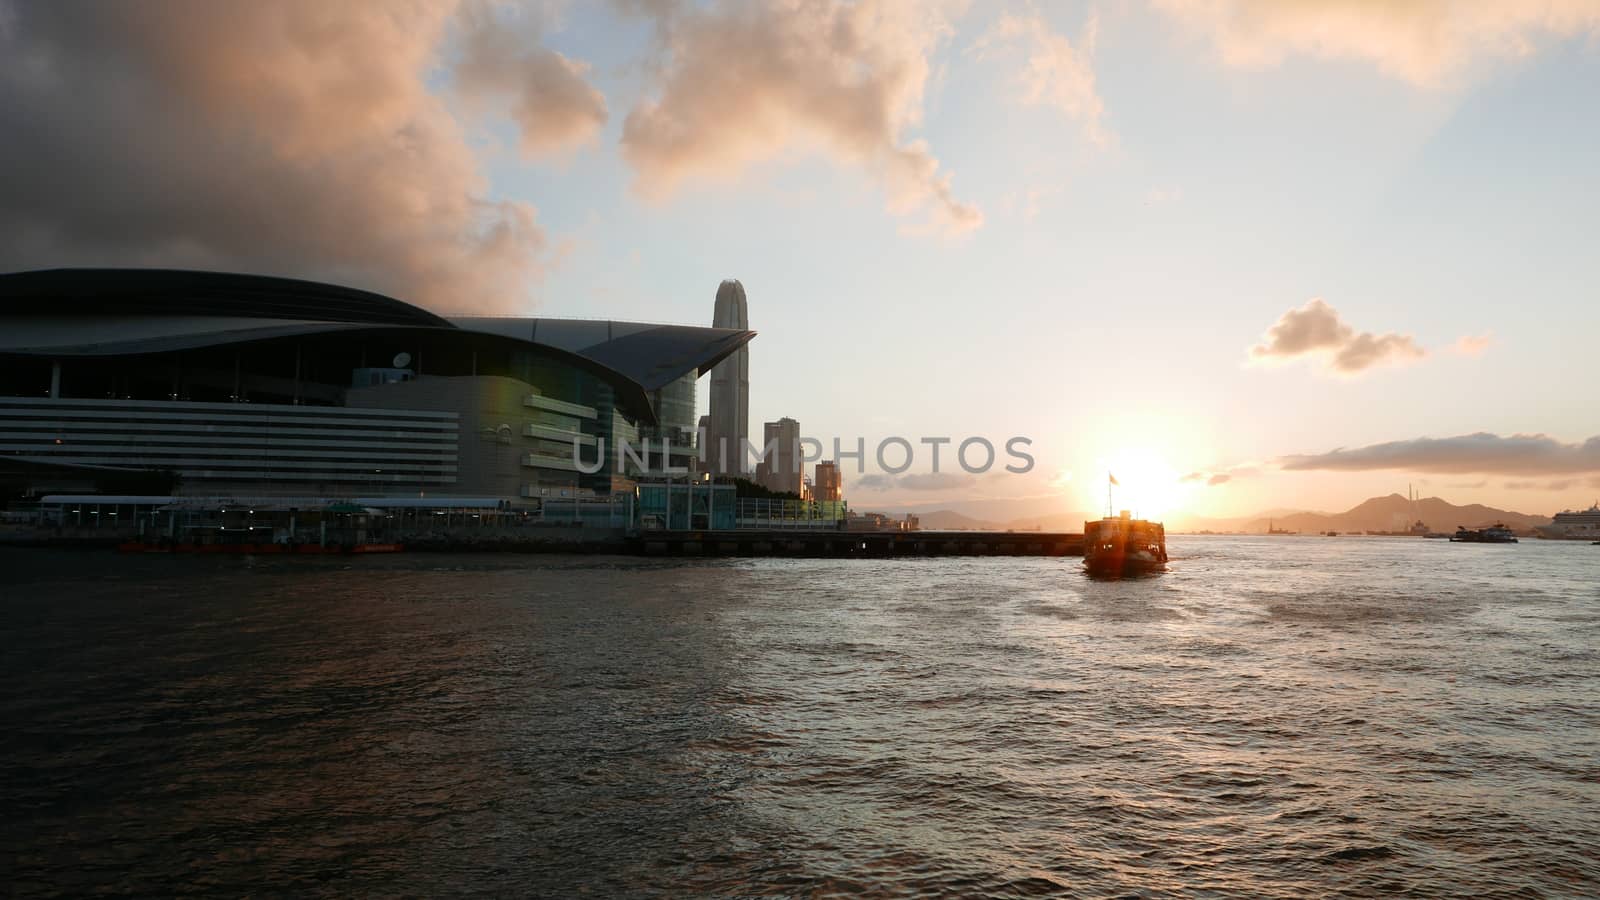 Hong Kong Victoria River, ferry and buildings at sunset by cougarsan